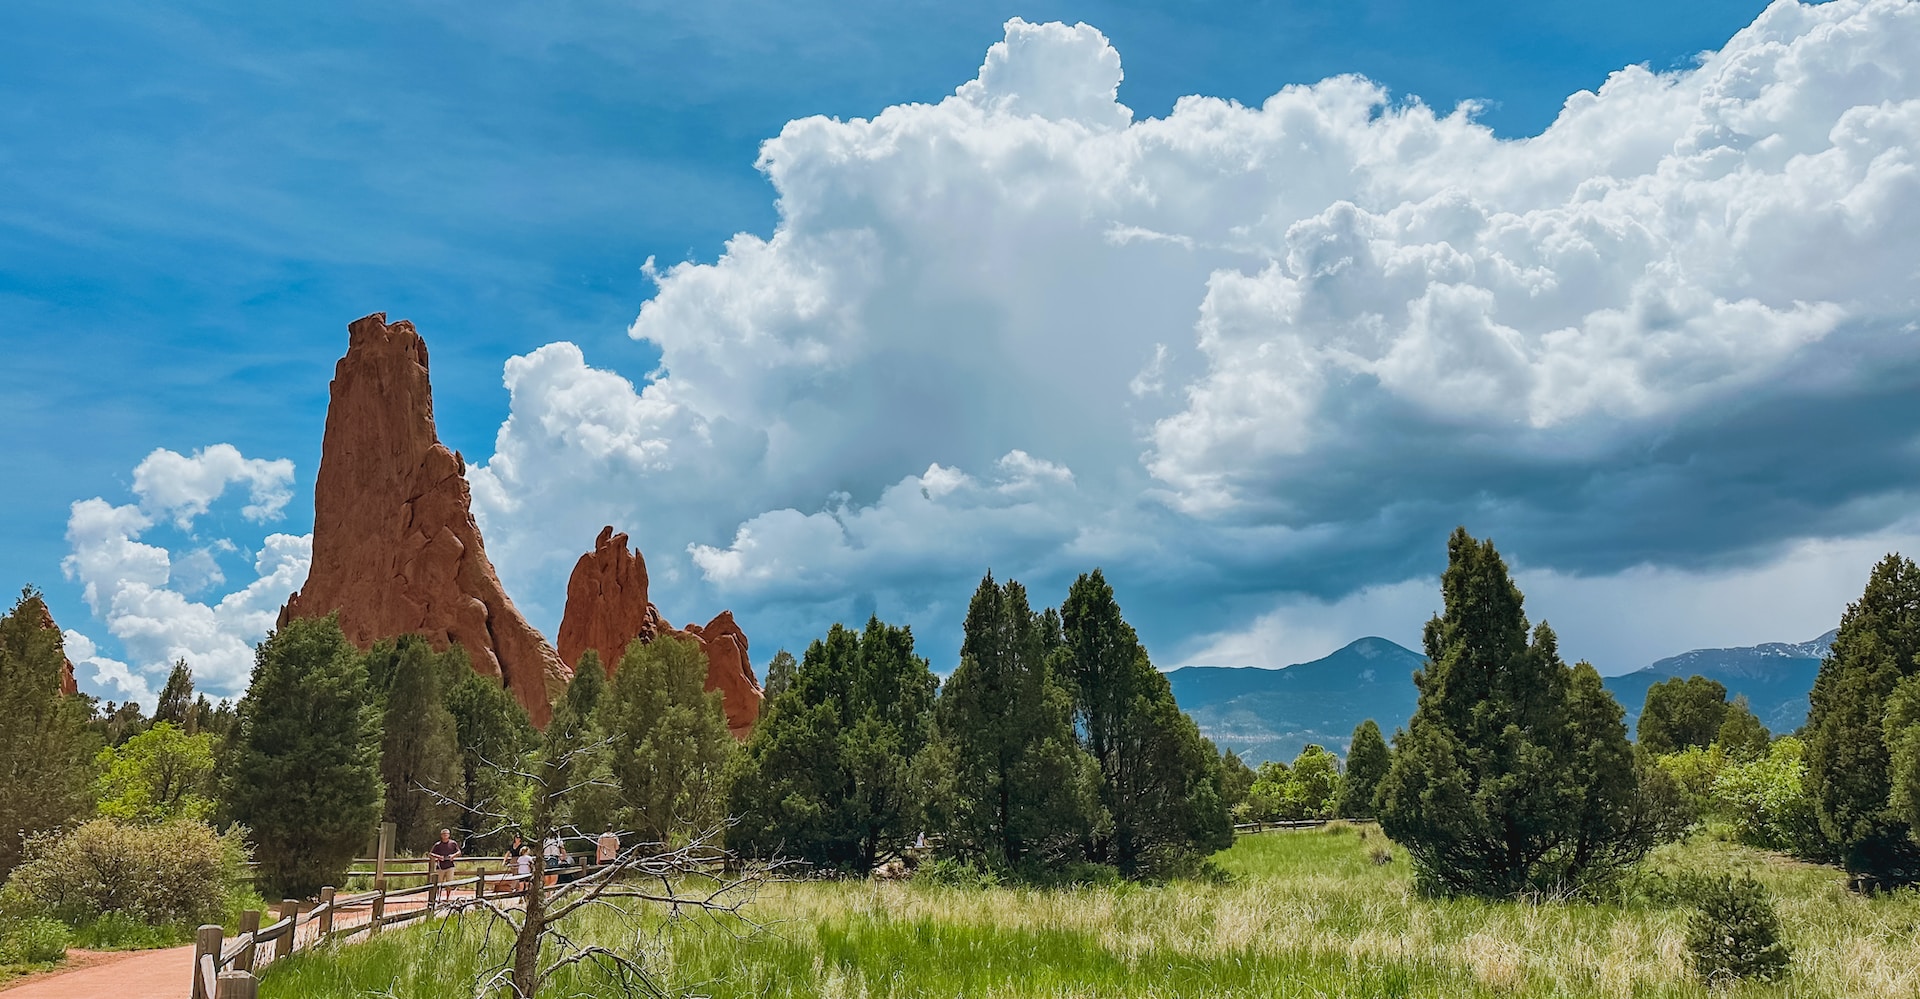 Garden of the Gods is just one showcase of the amazing nature in Colorado Springs.